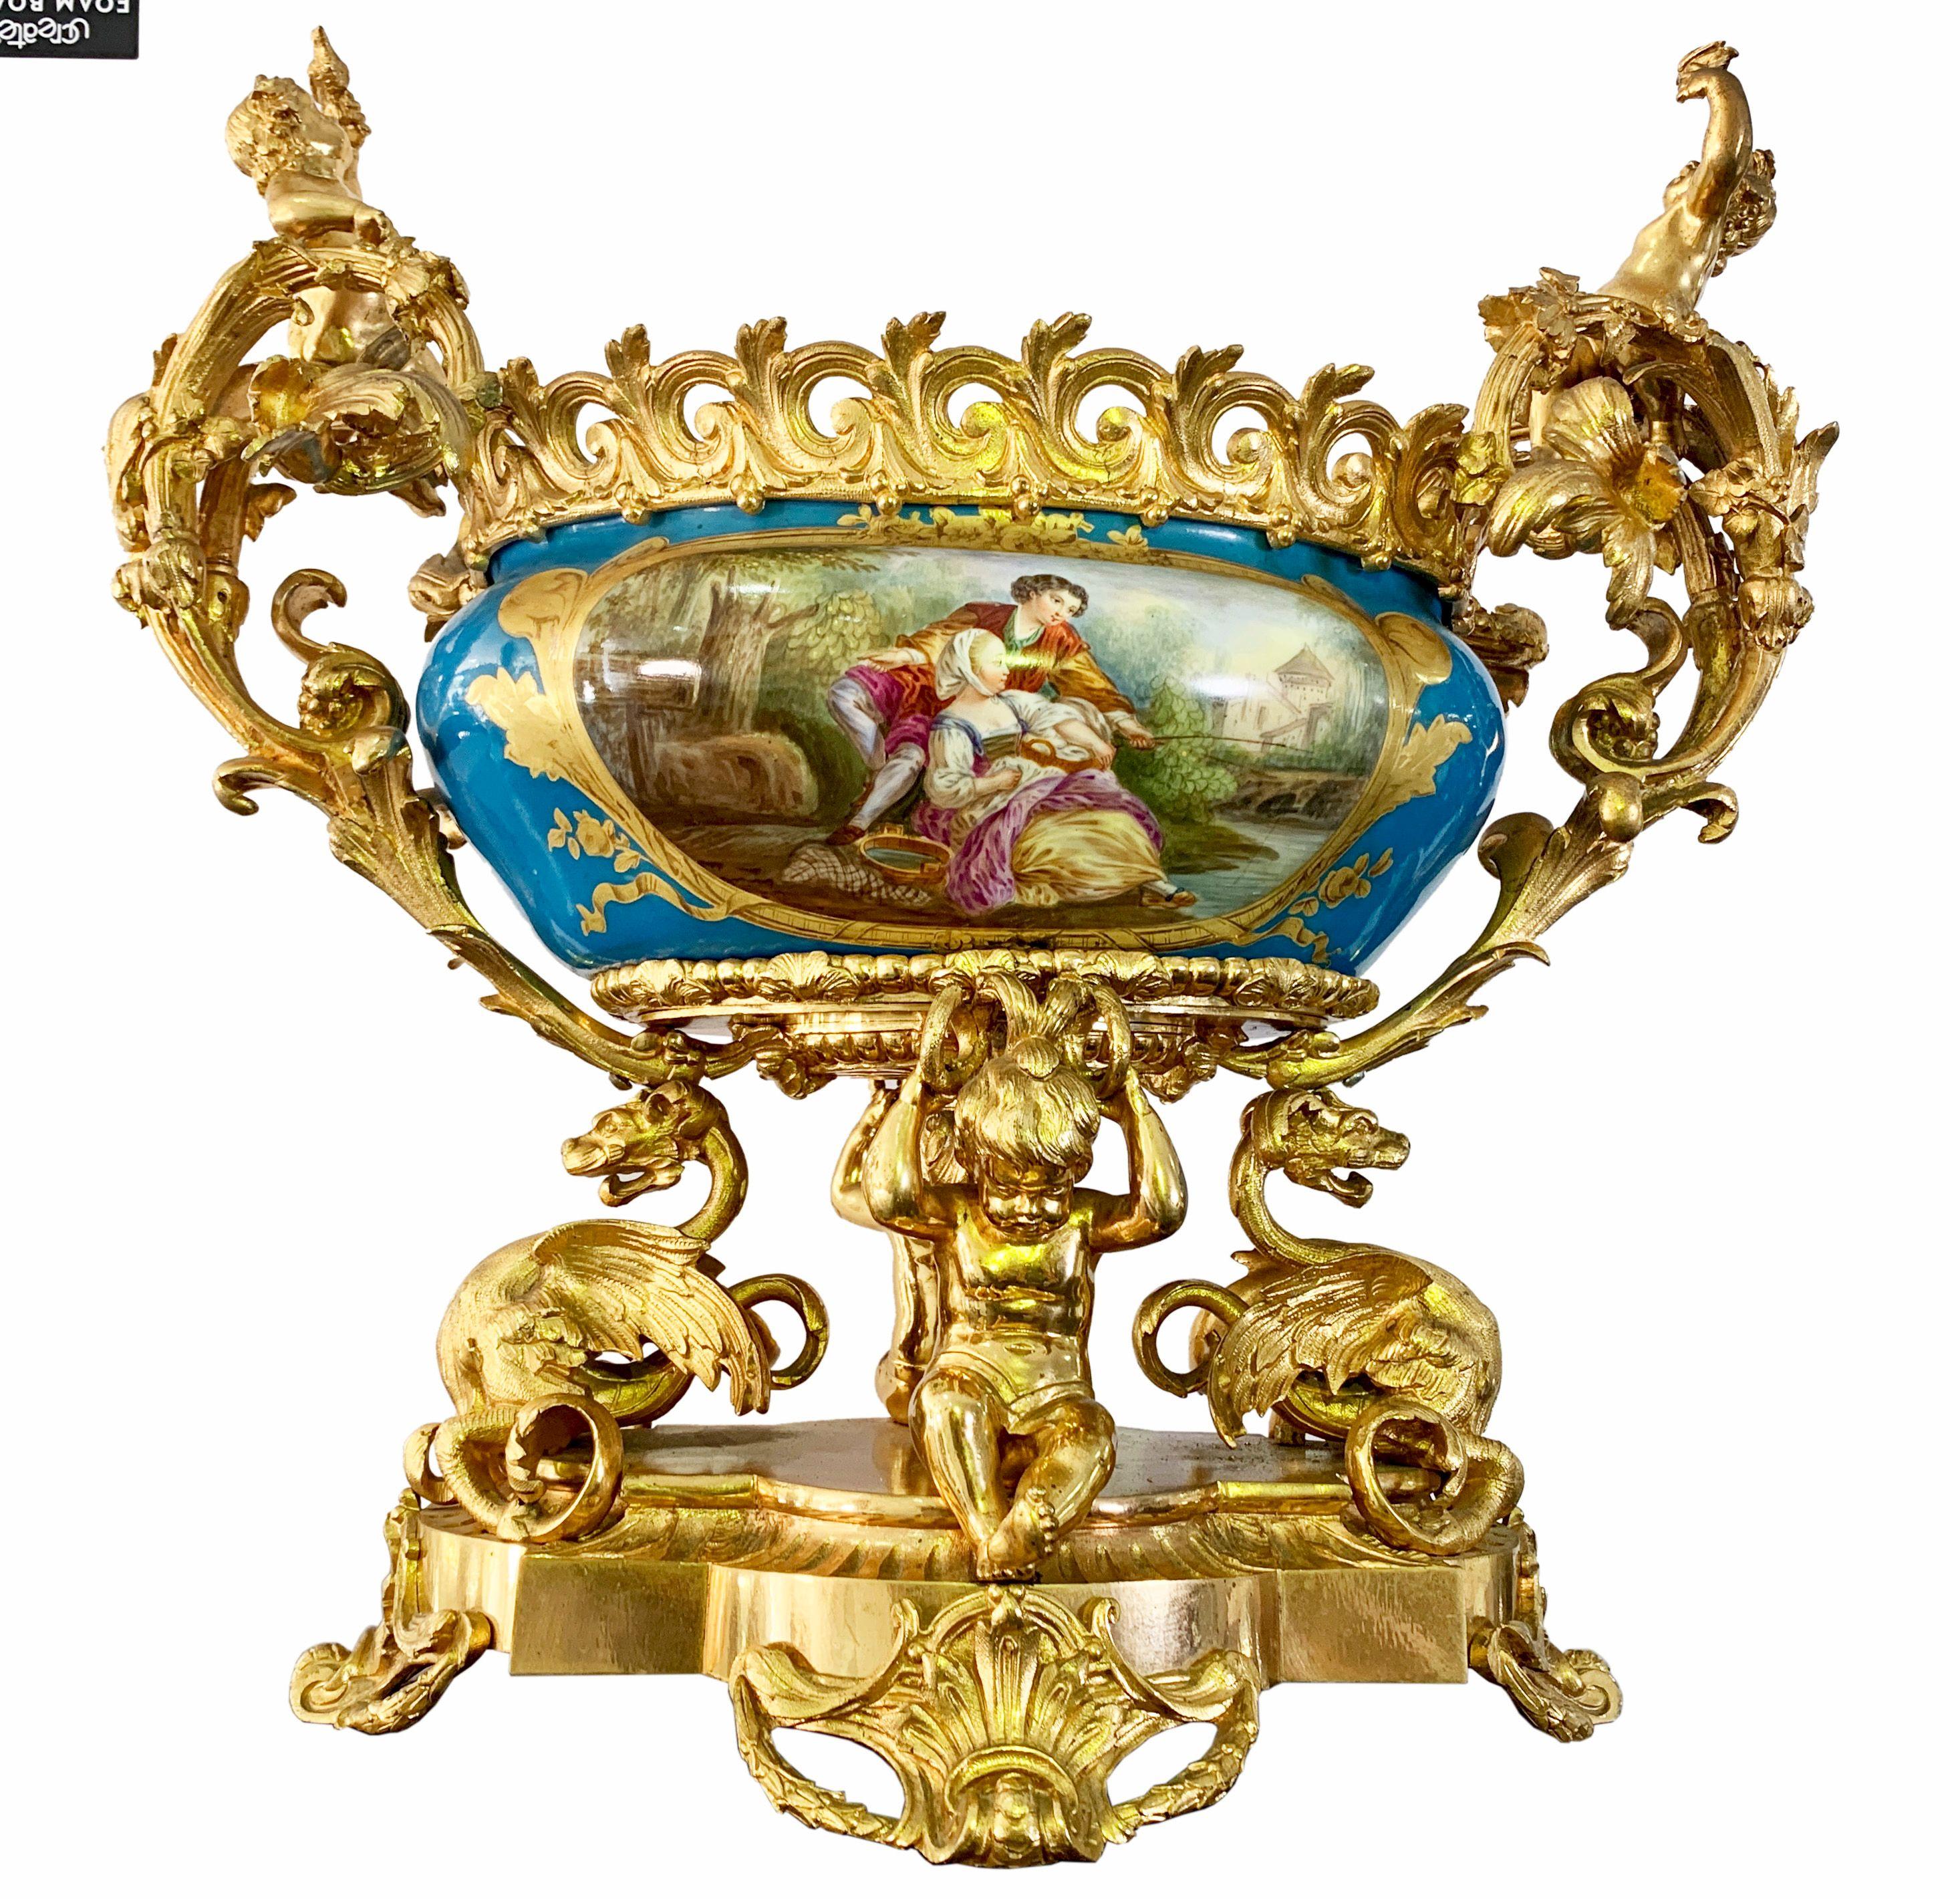 A very fine and unusual 19th century French Sevres style Porcelain gilt-bronze mounted figural centerpiece. Having two molded cherubs holding birds on the handles of the masterfully painted porcelain bowl supported by two dragons and two sitting